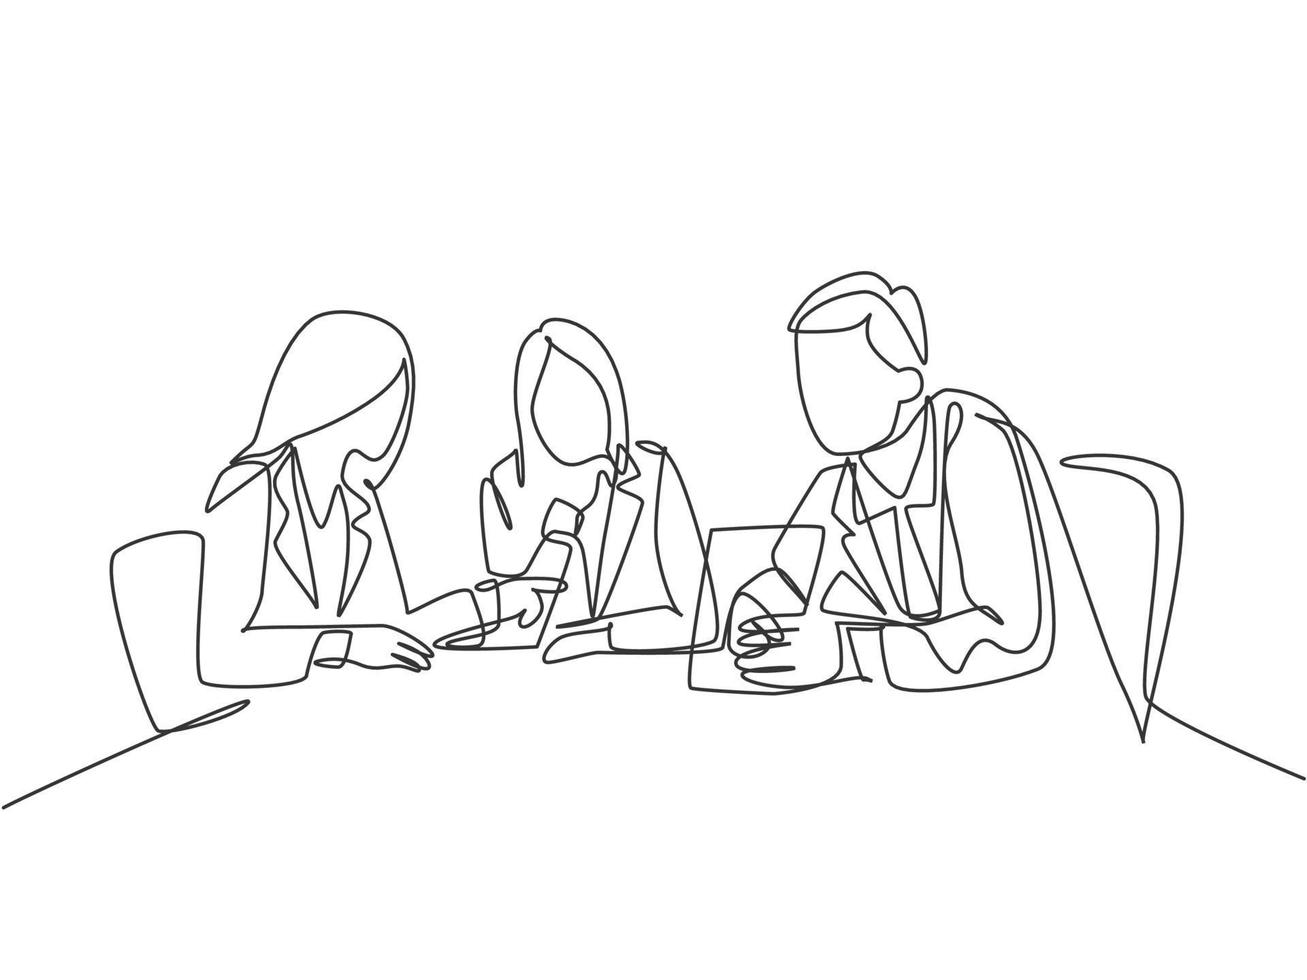 One single line drawing of young company founders brainstorming innovation ideas in a business meeting with colleagues. Startup process concept. Continuous line draw design graphic vector illustration